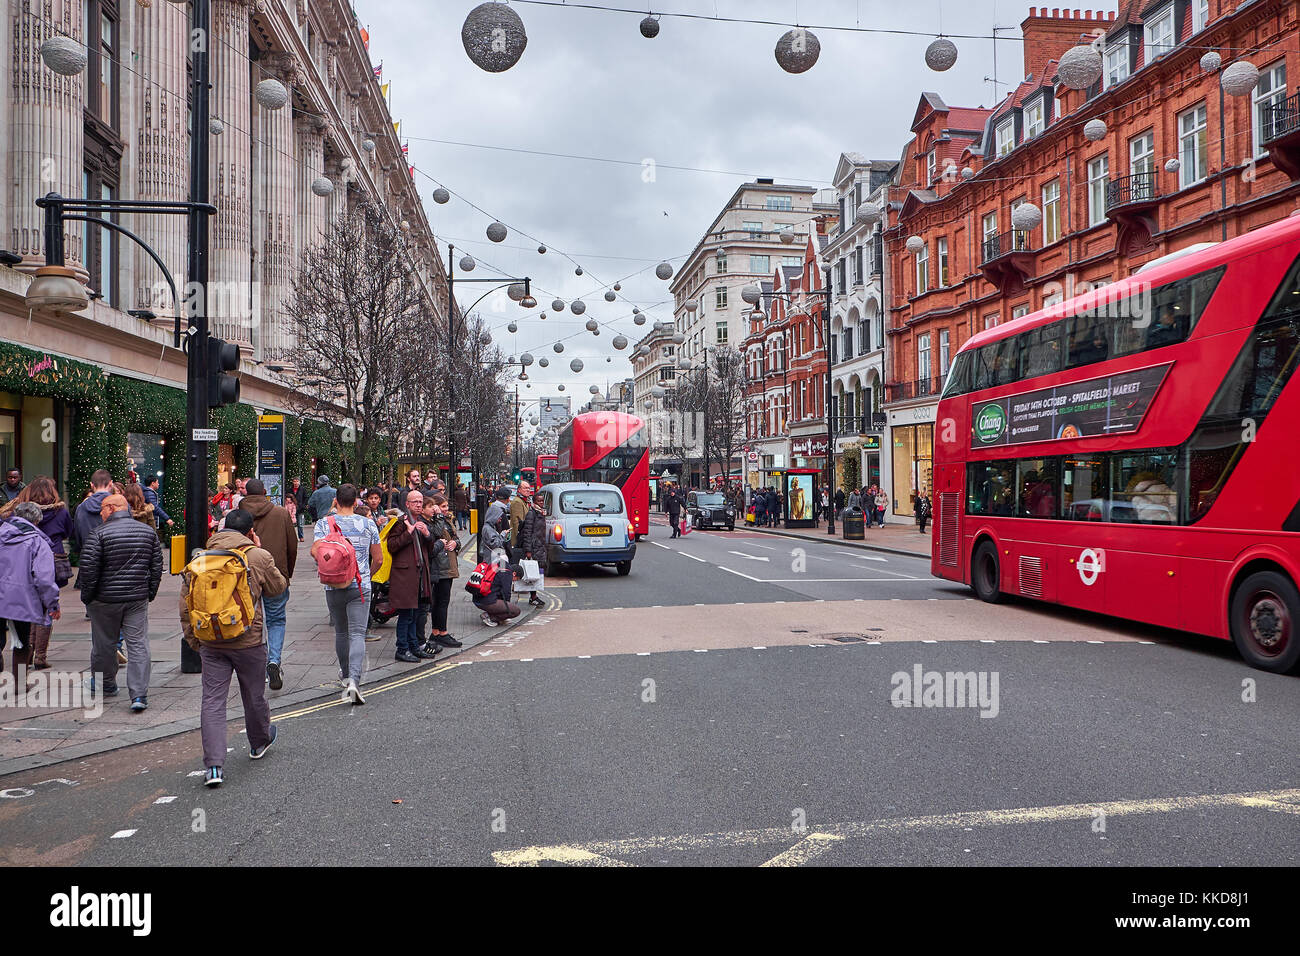 LONDON CITY - DECEMBER 23, 2016: Street crowded with red double decker buses, and many people, in Oxford Street at Christmas time Stock Photo